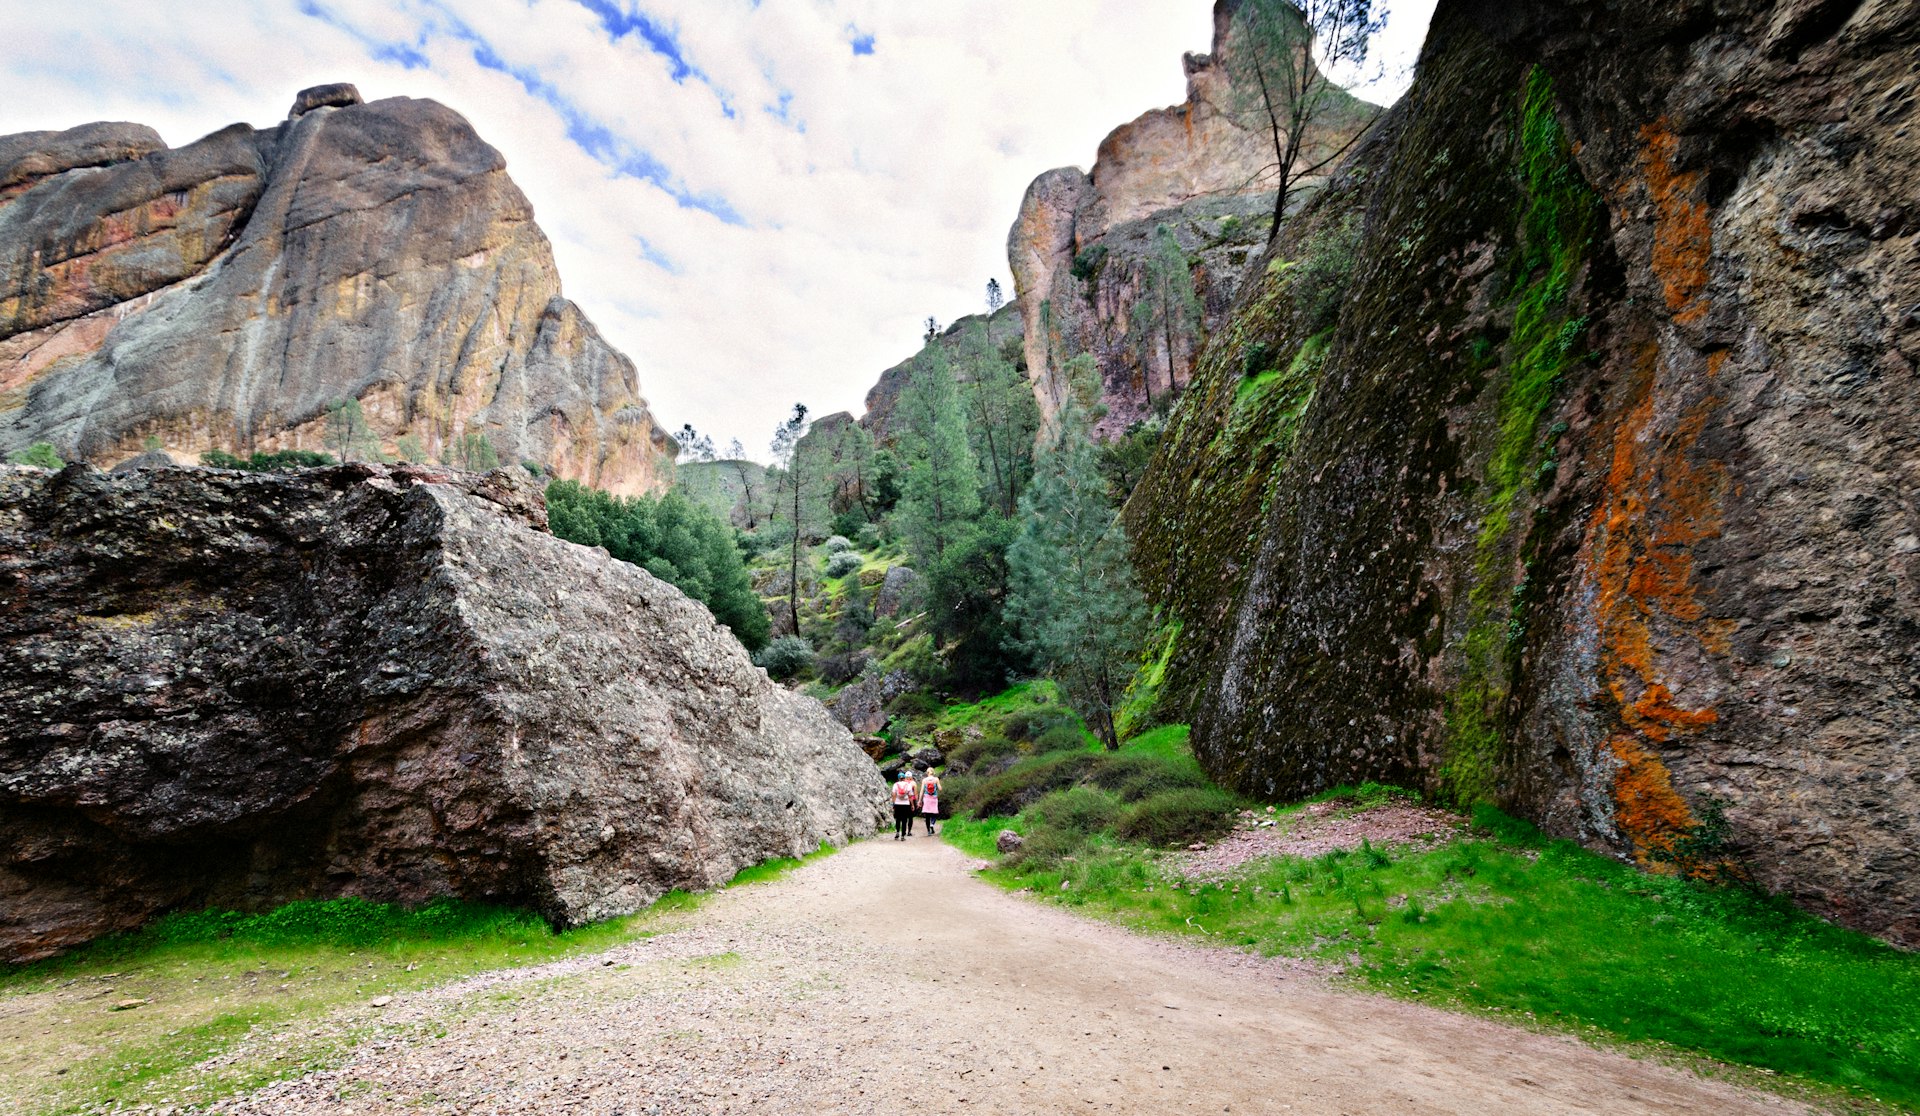 Hikers on a trail leading in spring through the Balconies Cliffs to the Balconies Caves, Pinnacles National Park, Soledad, California, USA